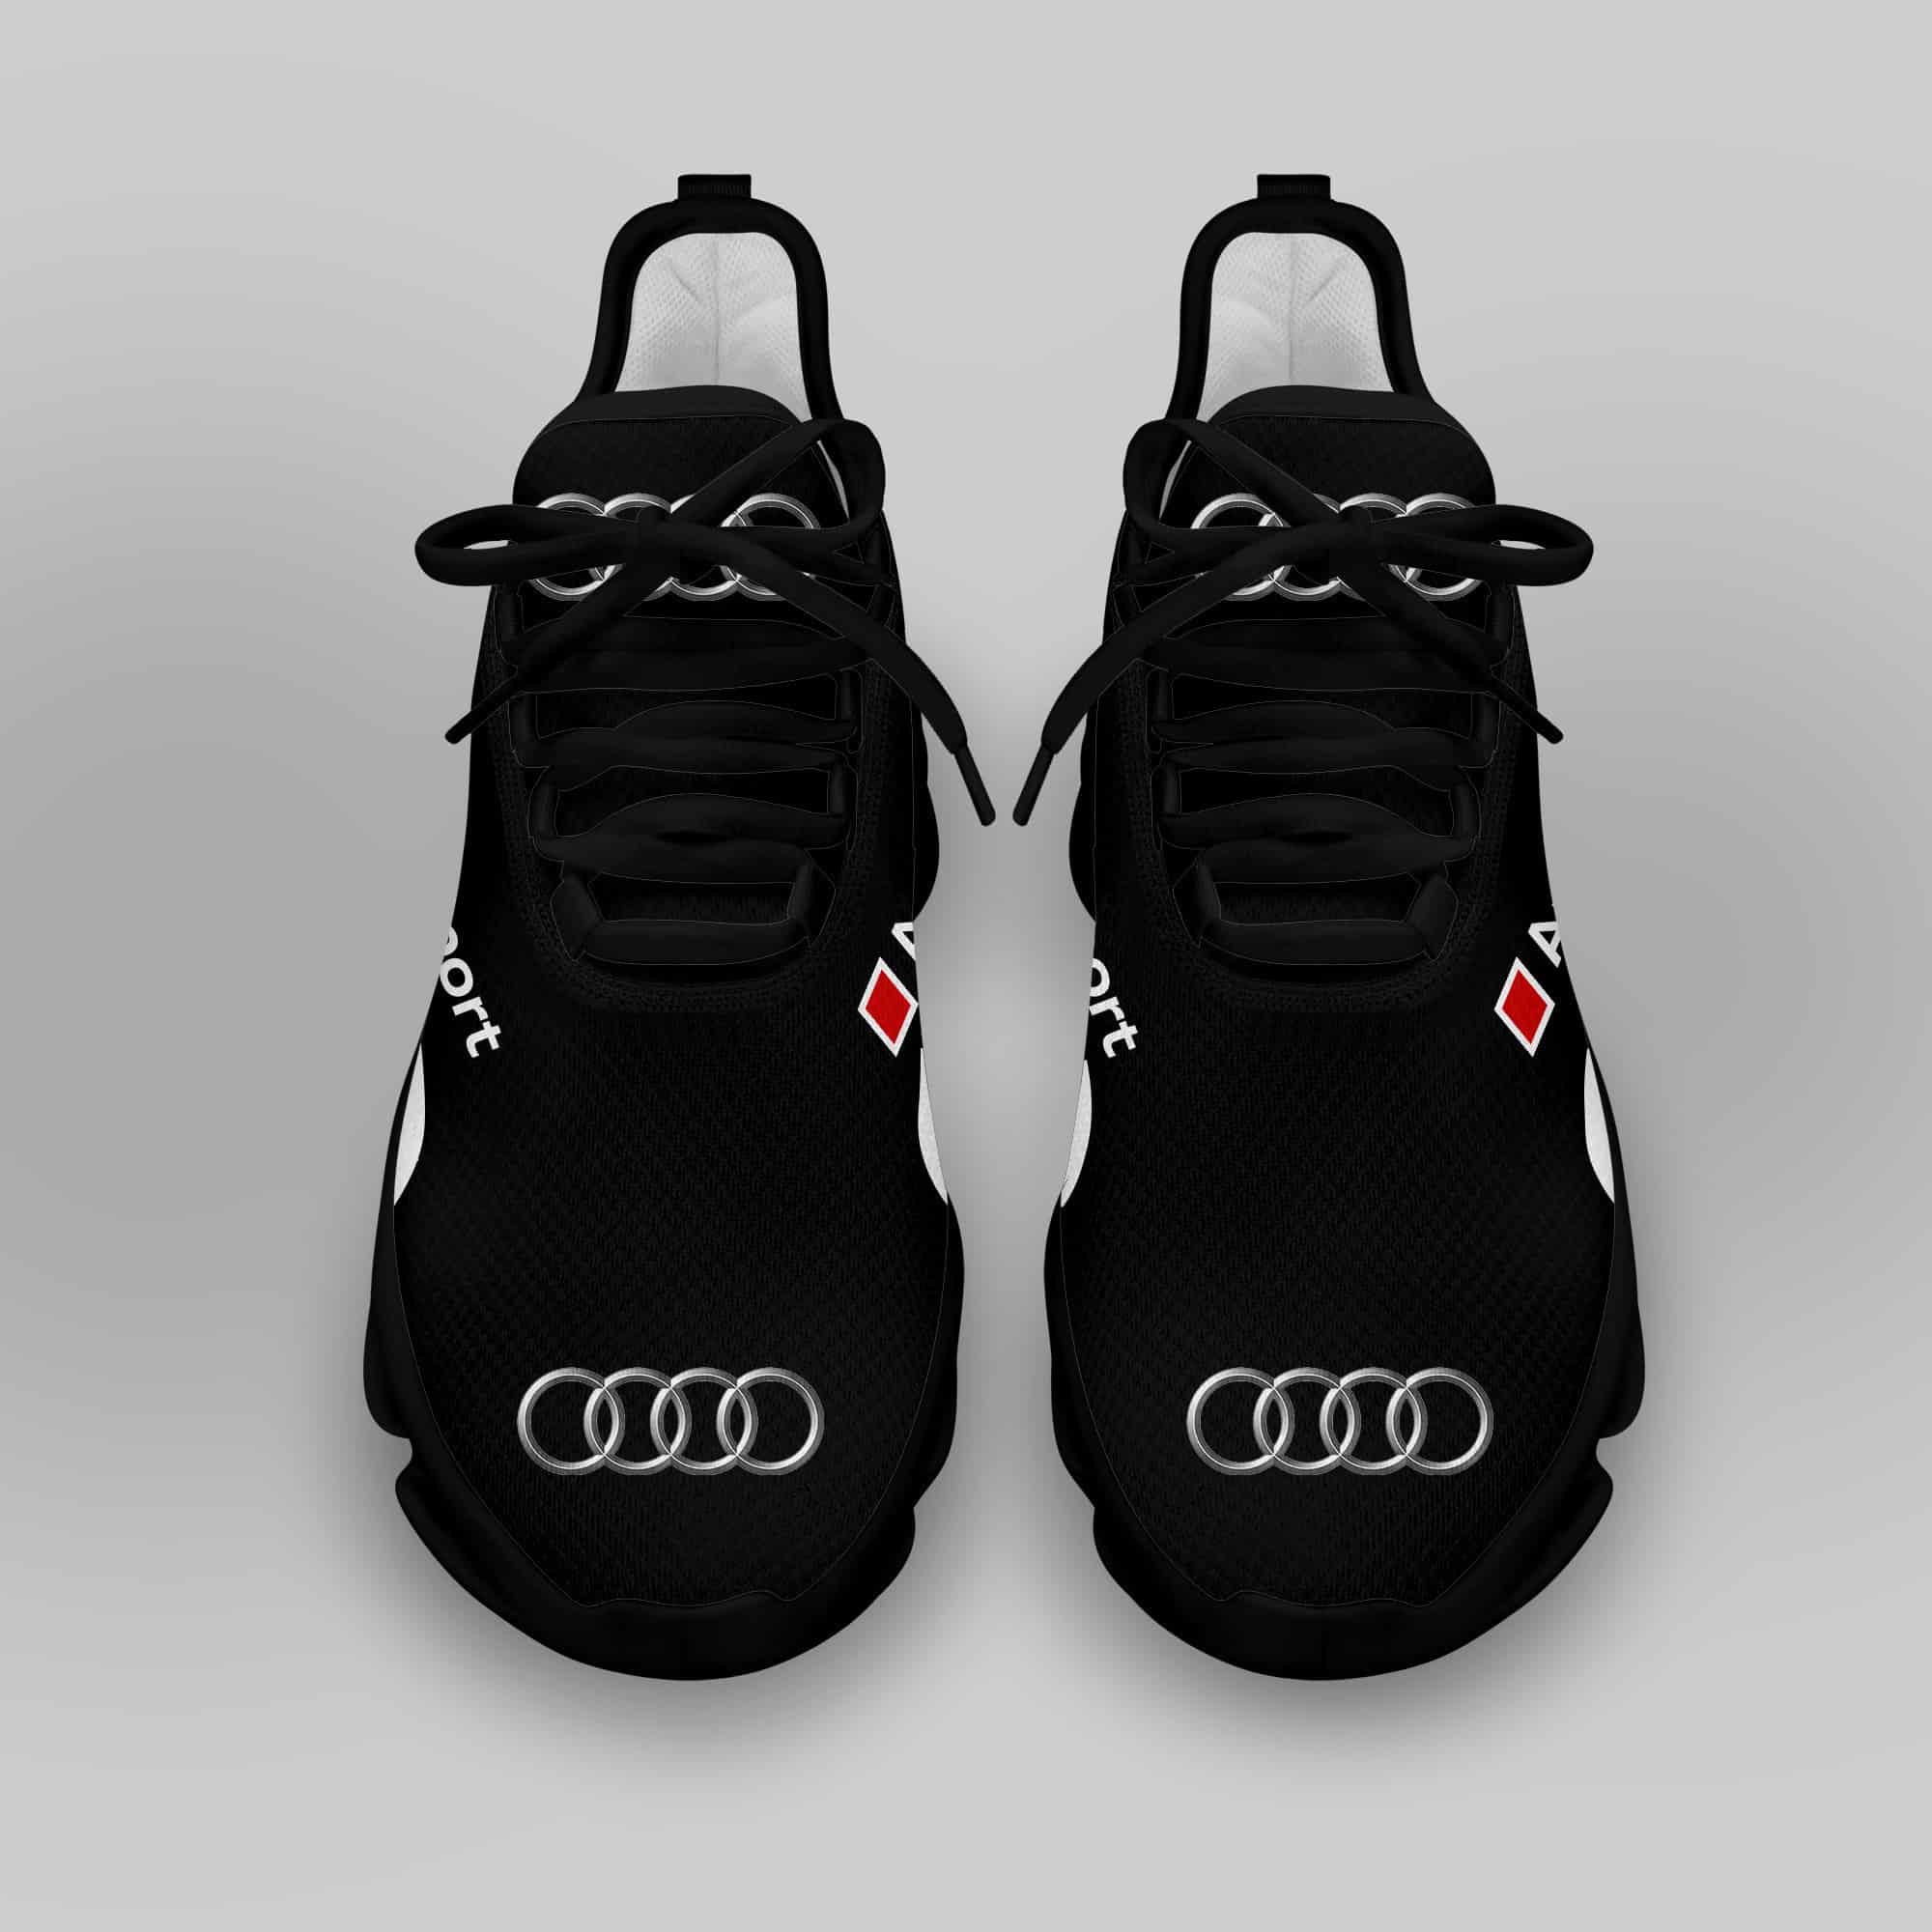 Audi Sport Running Shoes Max Soul Shoes Sneakers Ver 31 4